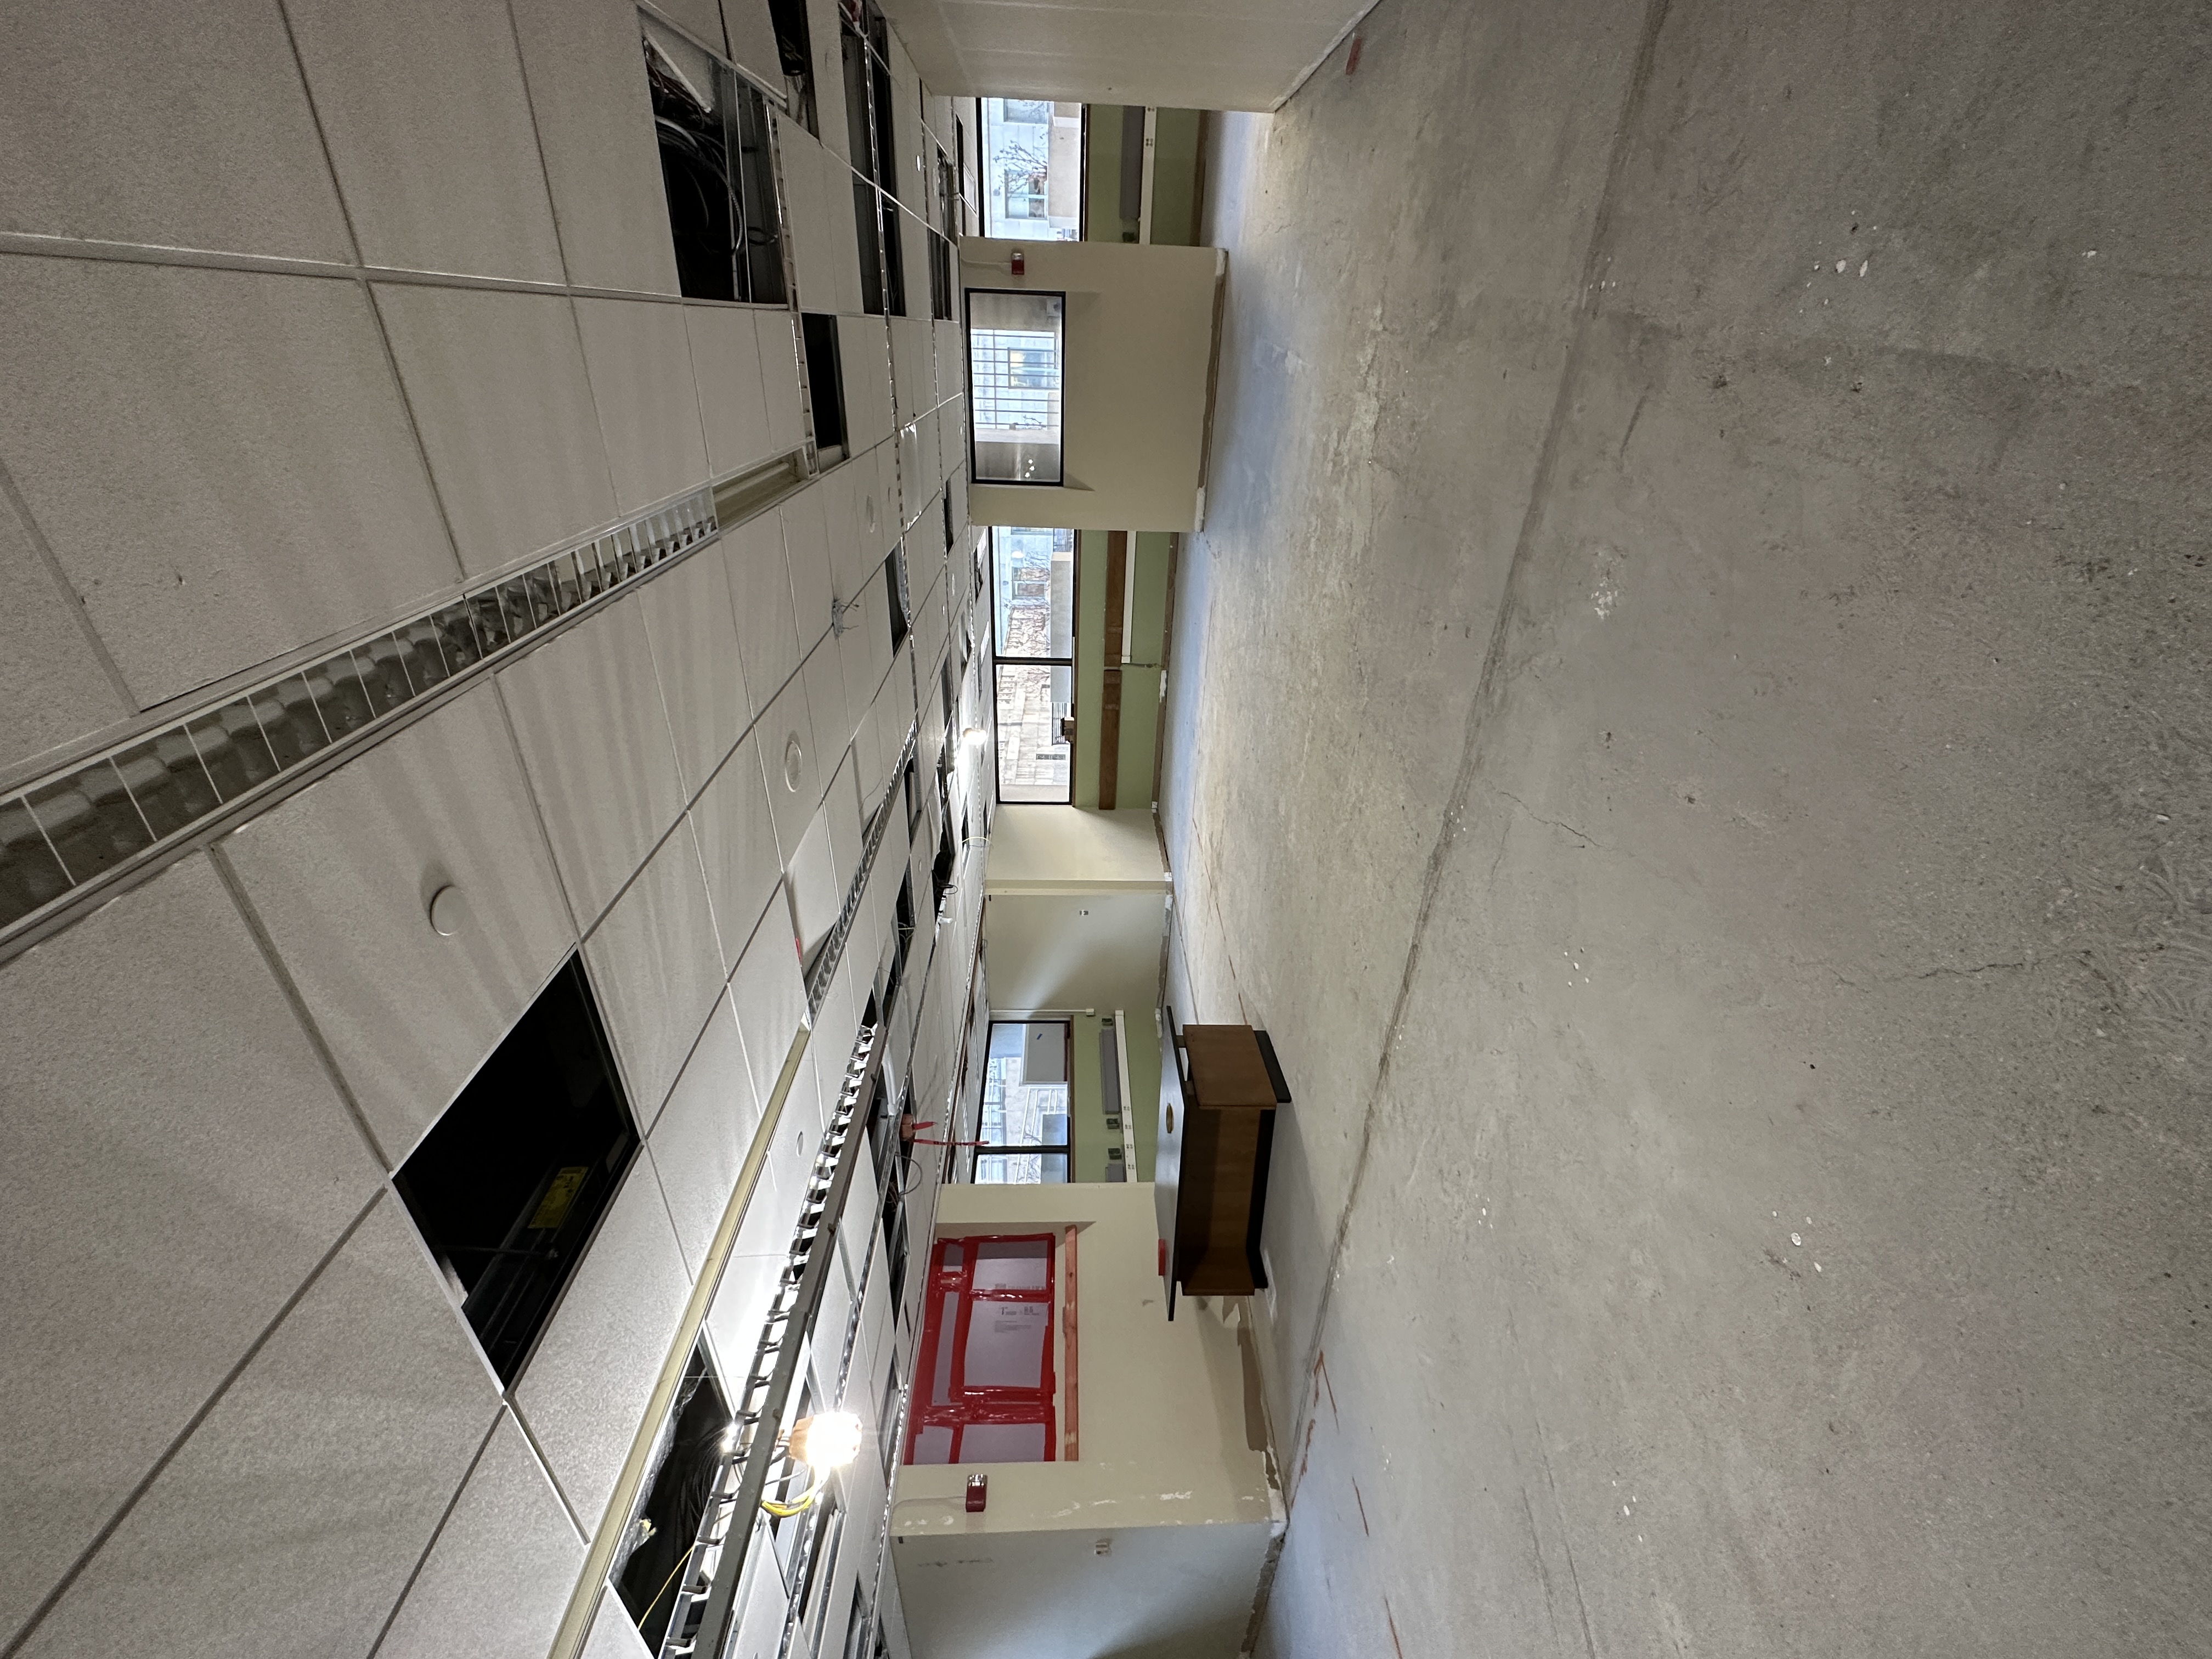 L1 renovation progress showing a cement floor and several missing drop ceiling tiles.